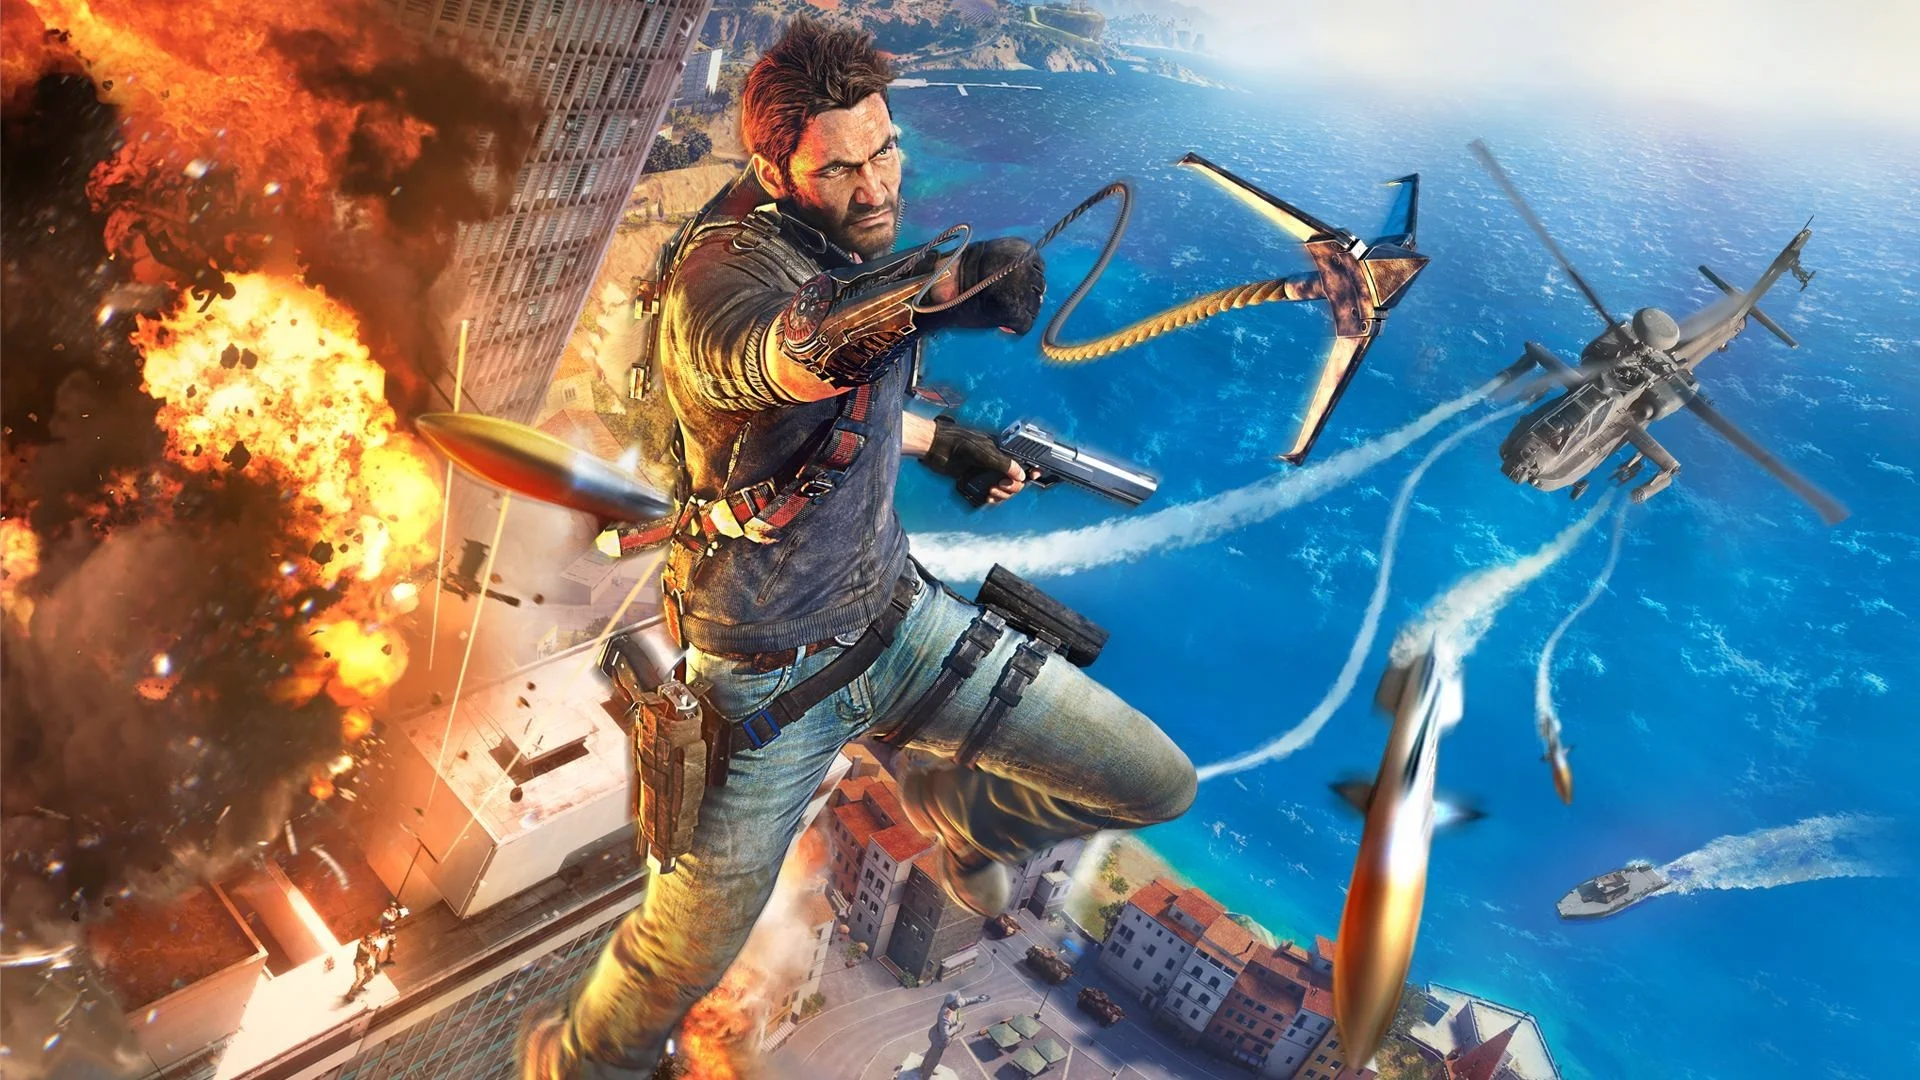 Action game Just Cause 3 surpassed 10 million copies sold